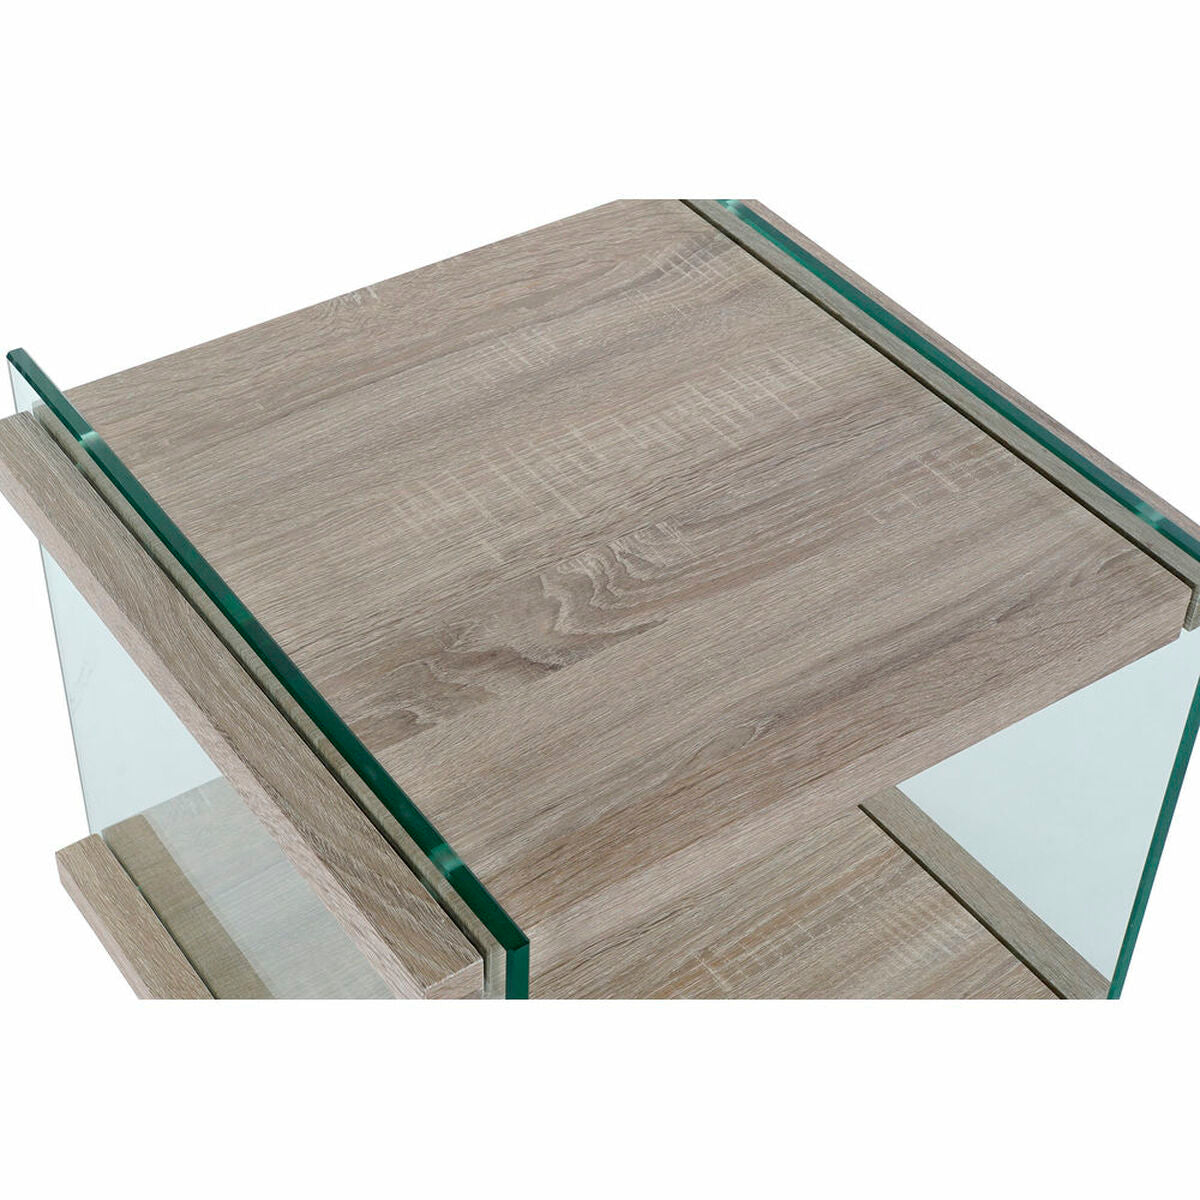 Bedside Table with Wooden Shelves and Glass (50 x 50 x 49 cm)